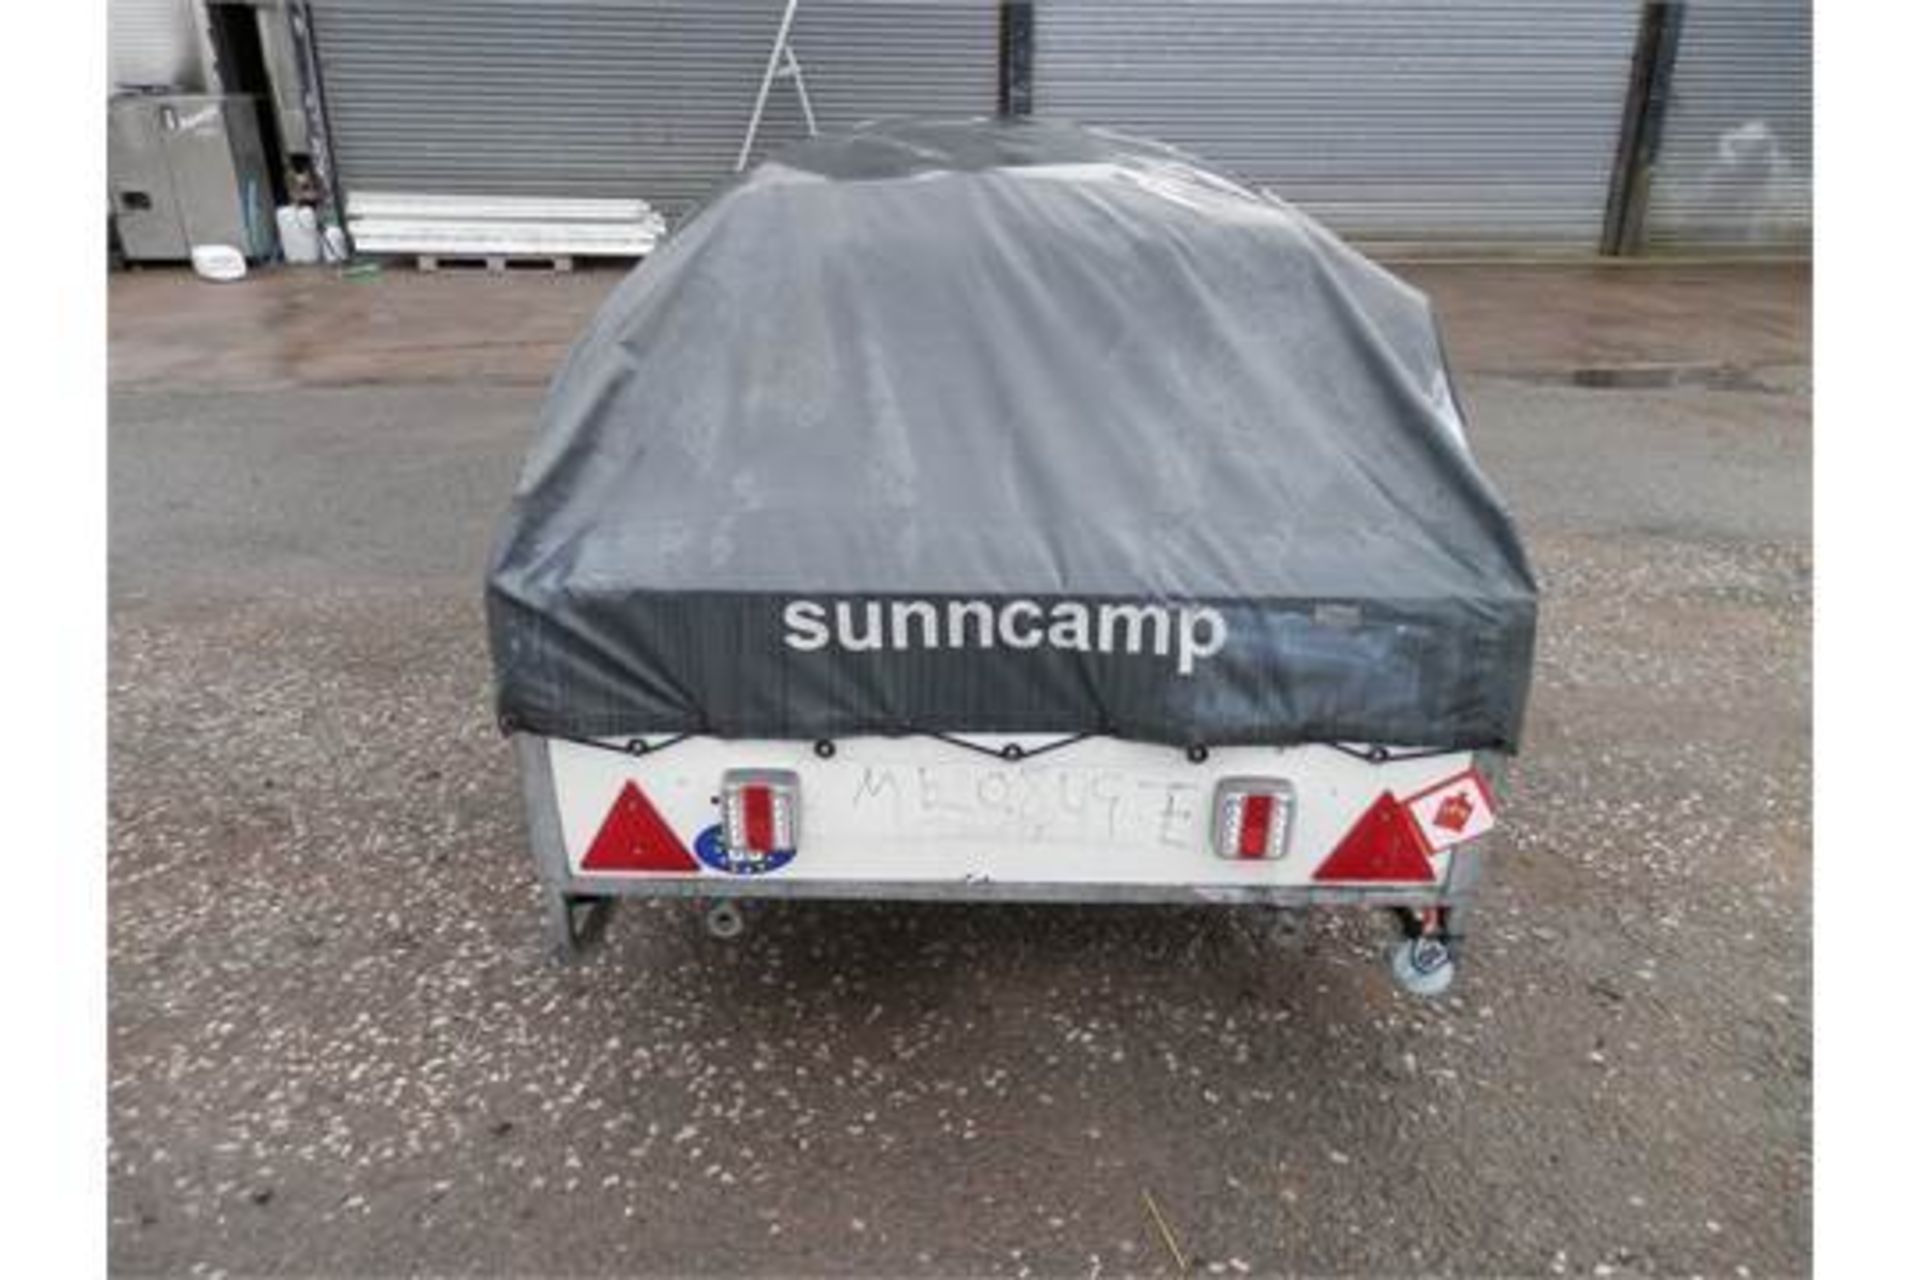 Sunncamp 350SE 4 Berth Trailer Tent with Sink and Gas Connection Point, this item appears to be - Image 4 of 11